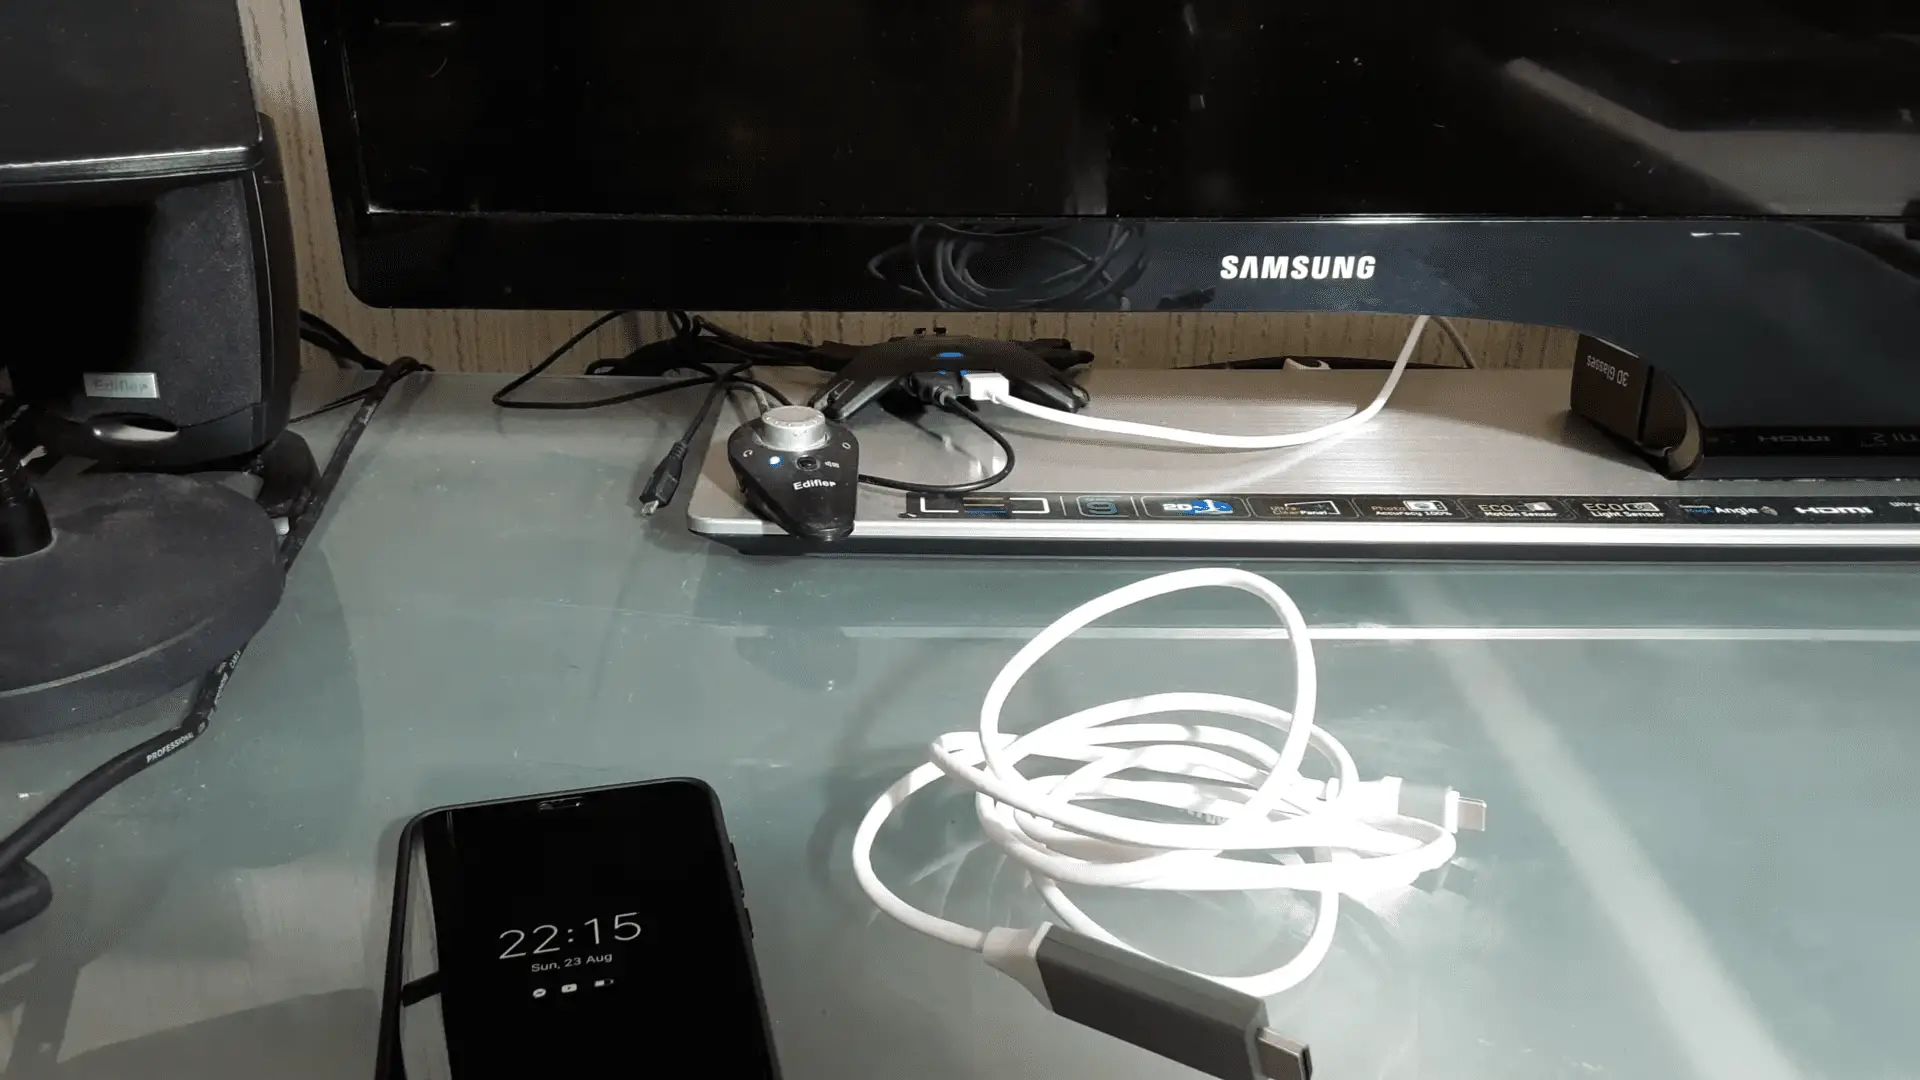 Connecting a USB Cable to a Samsung TV